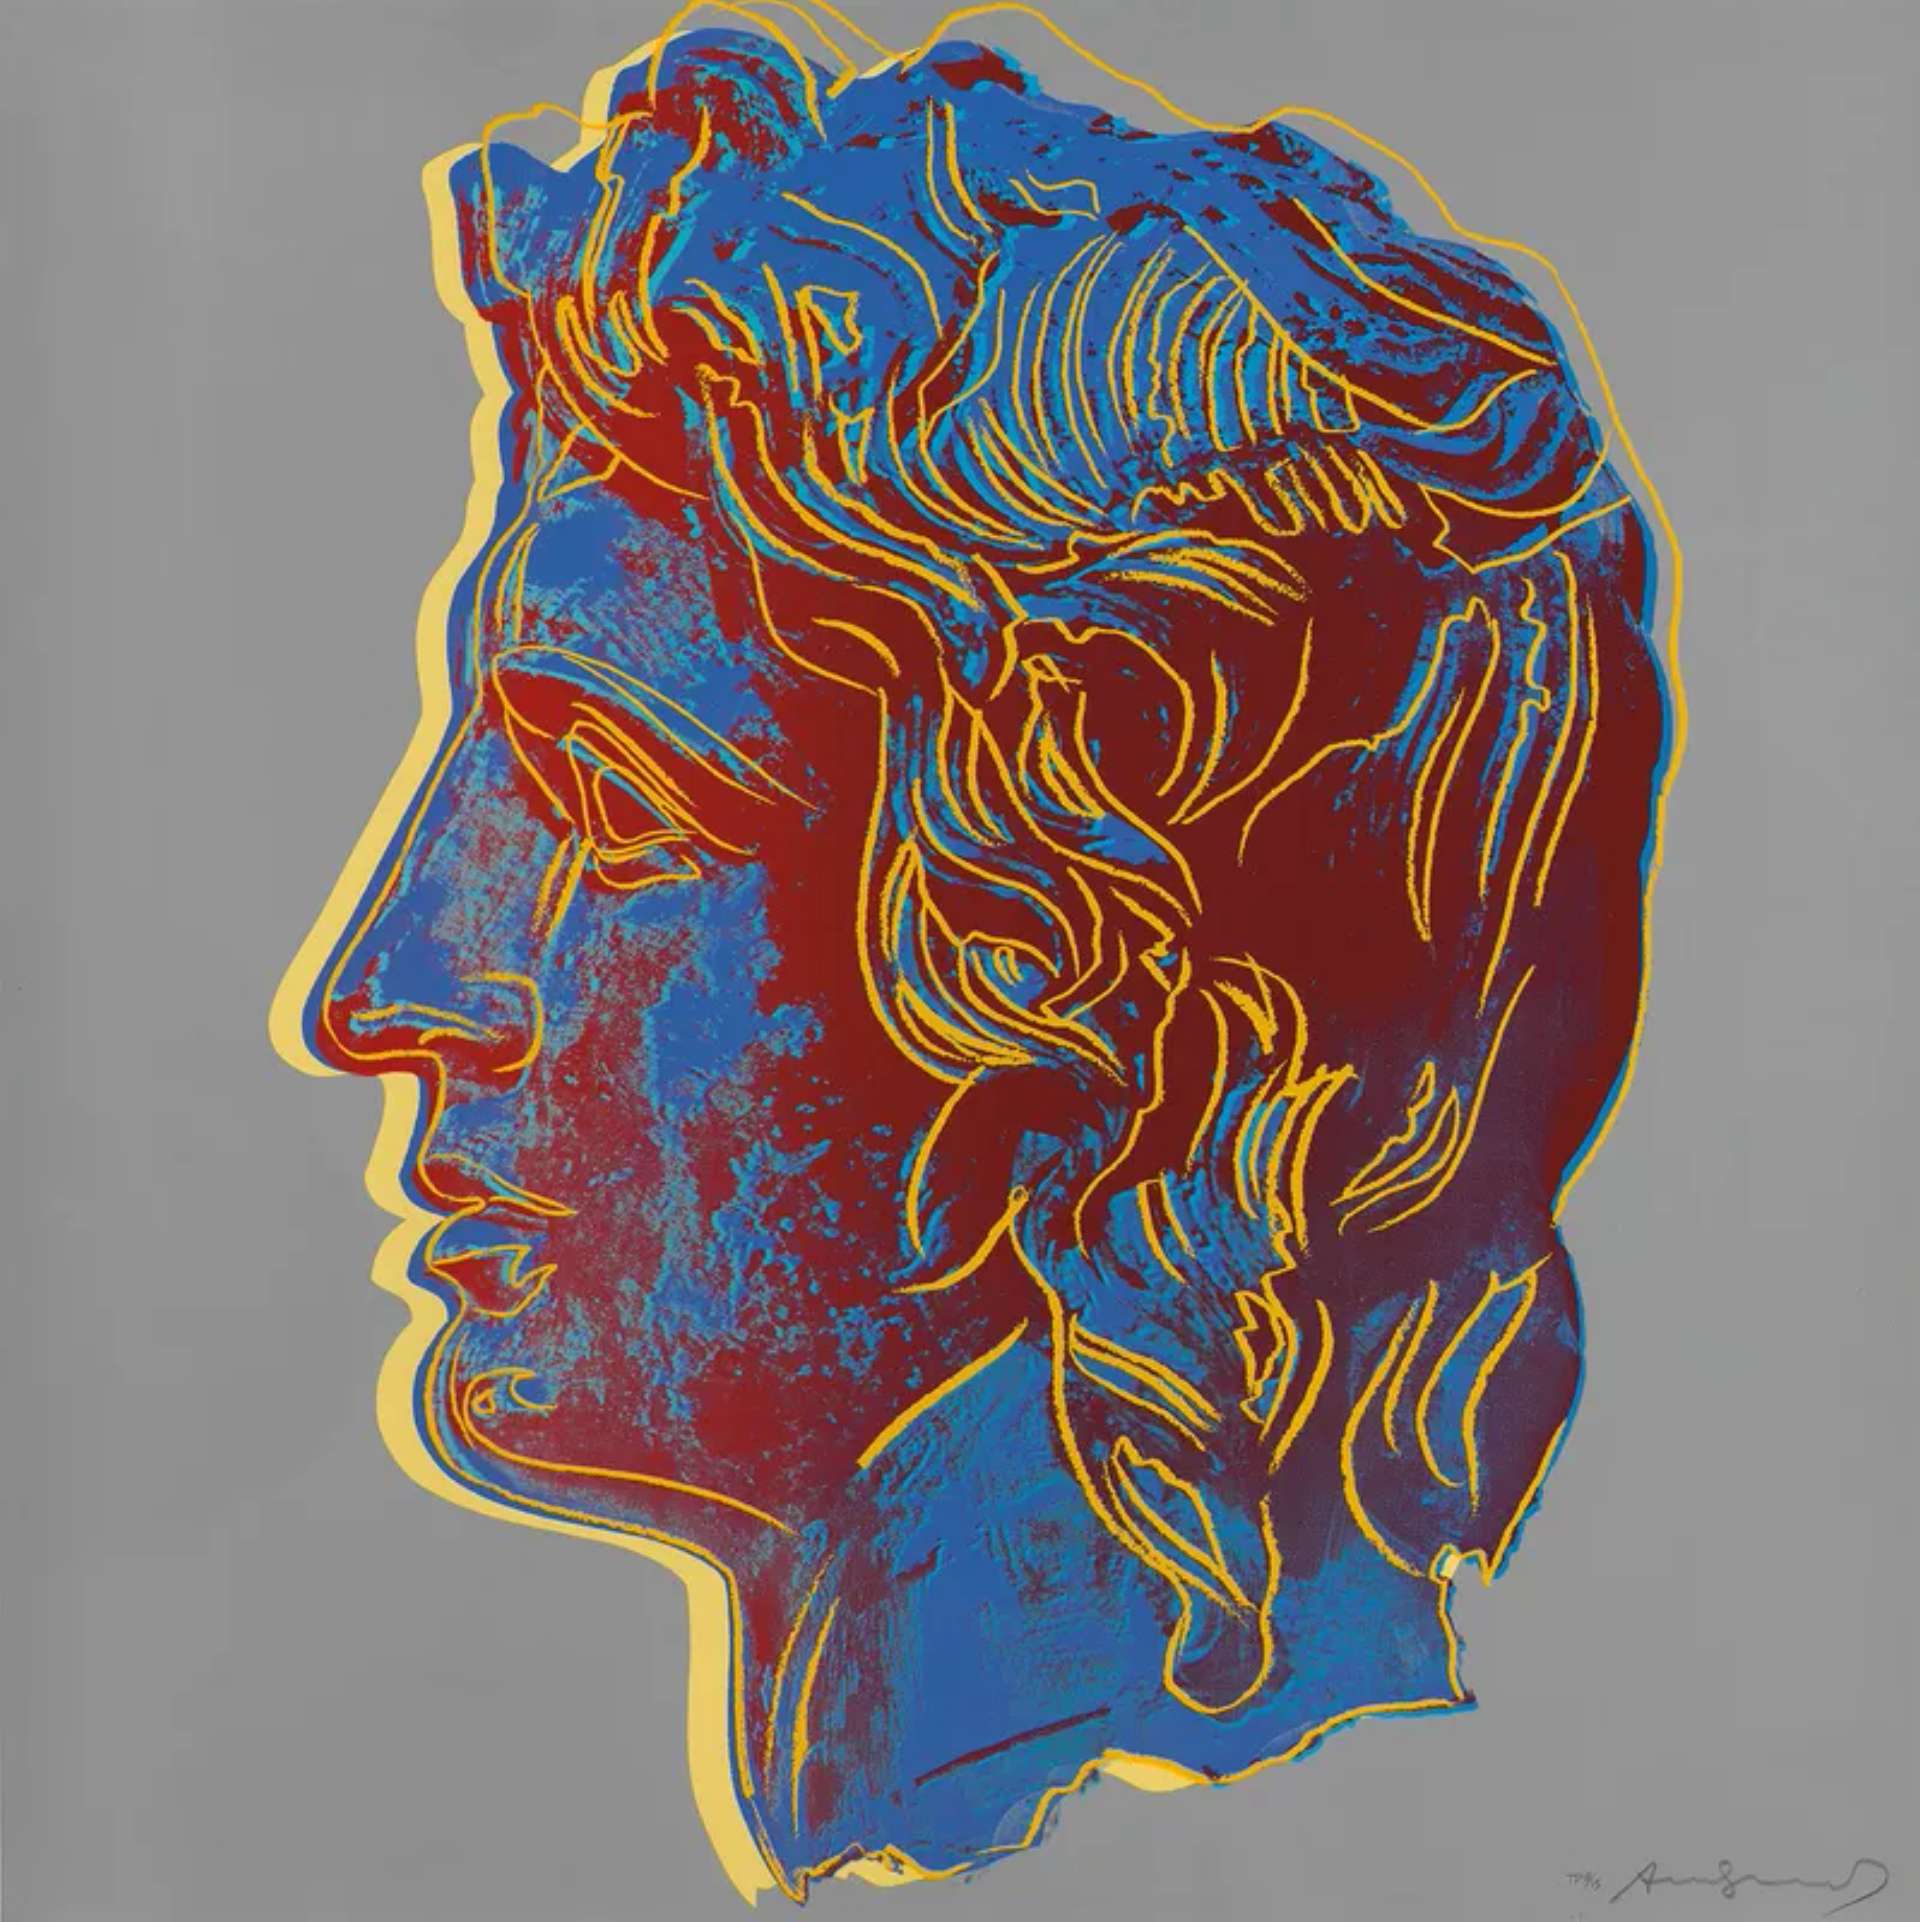 Alexander The Great by Andy Warhol